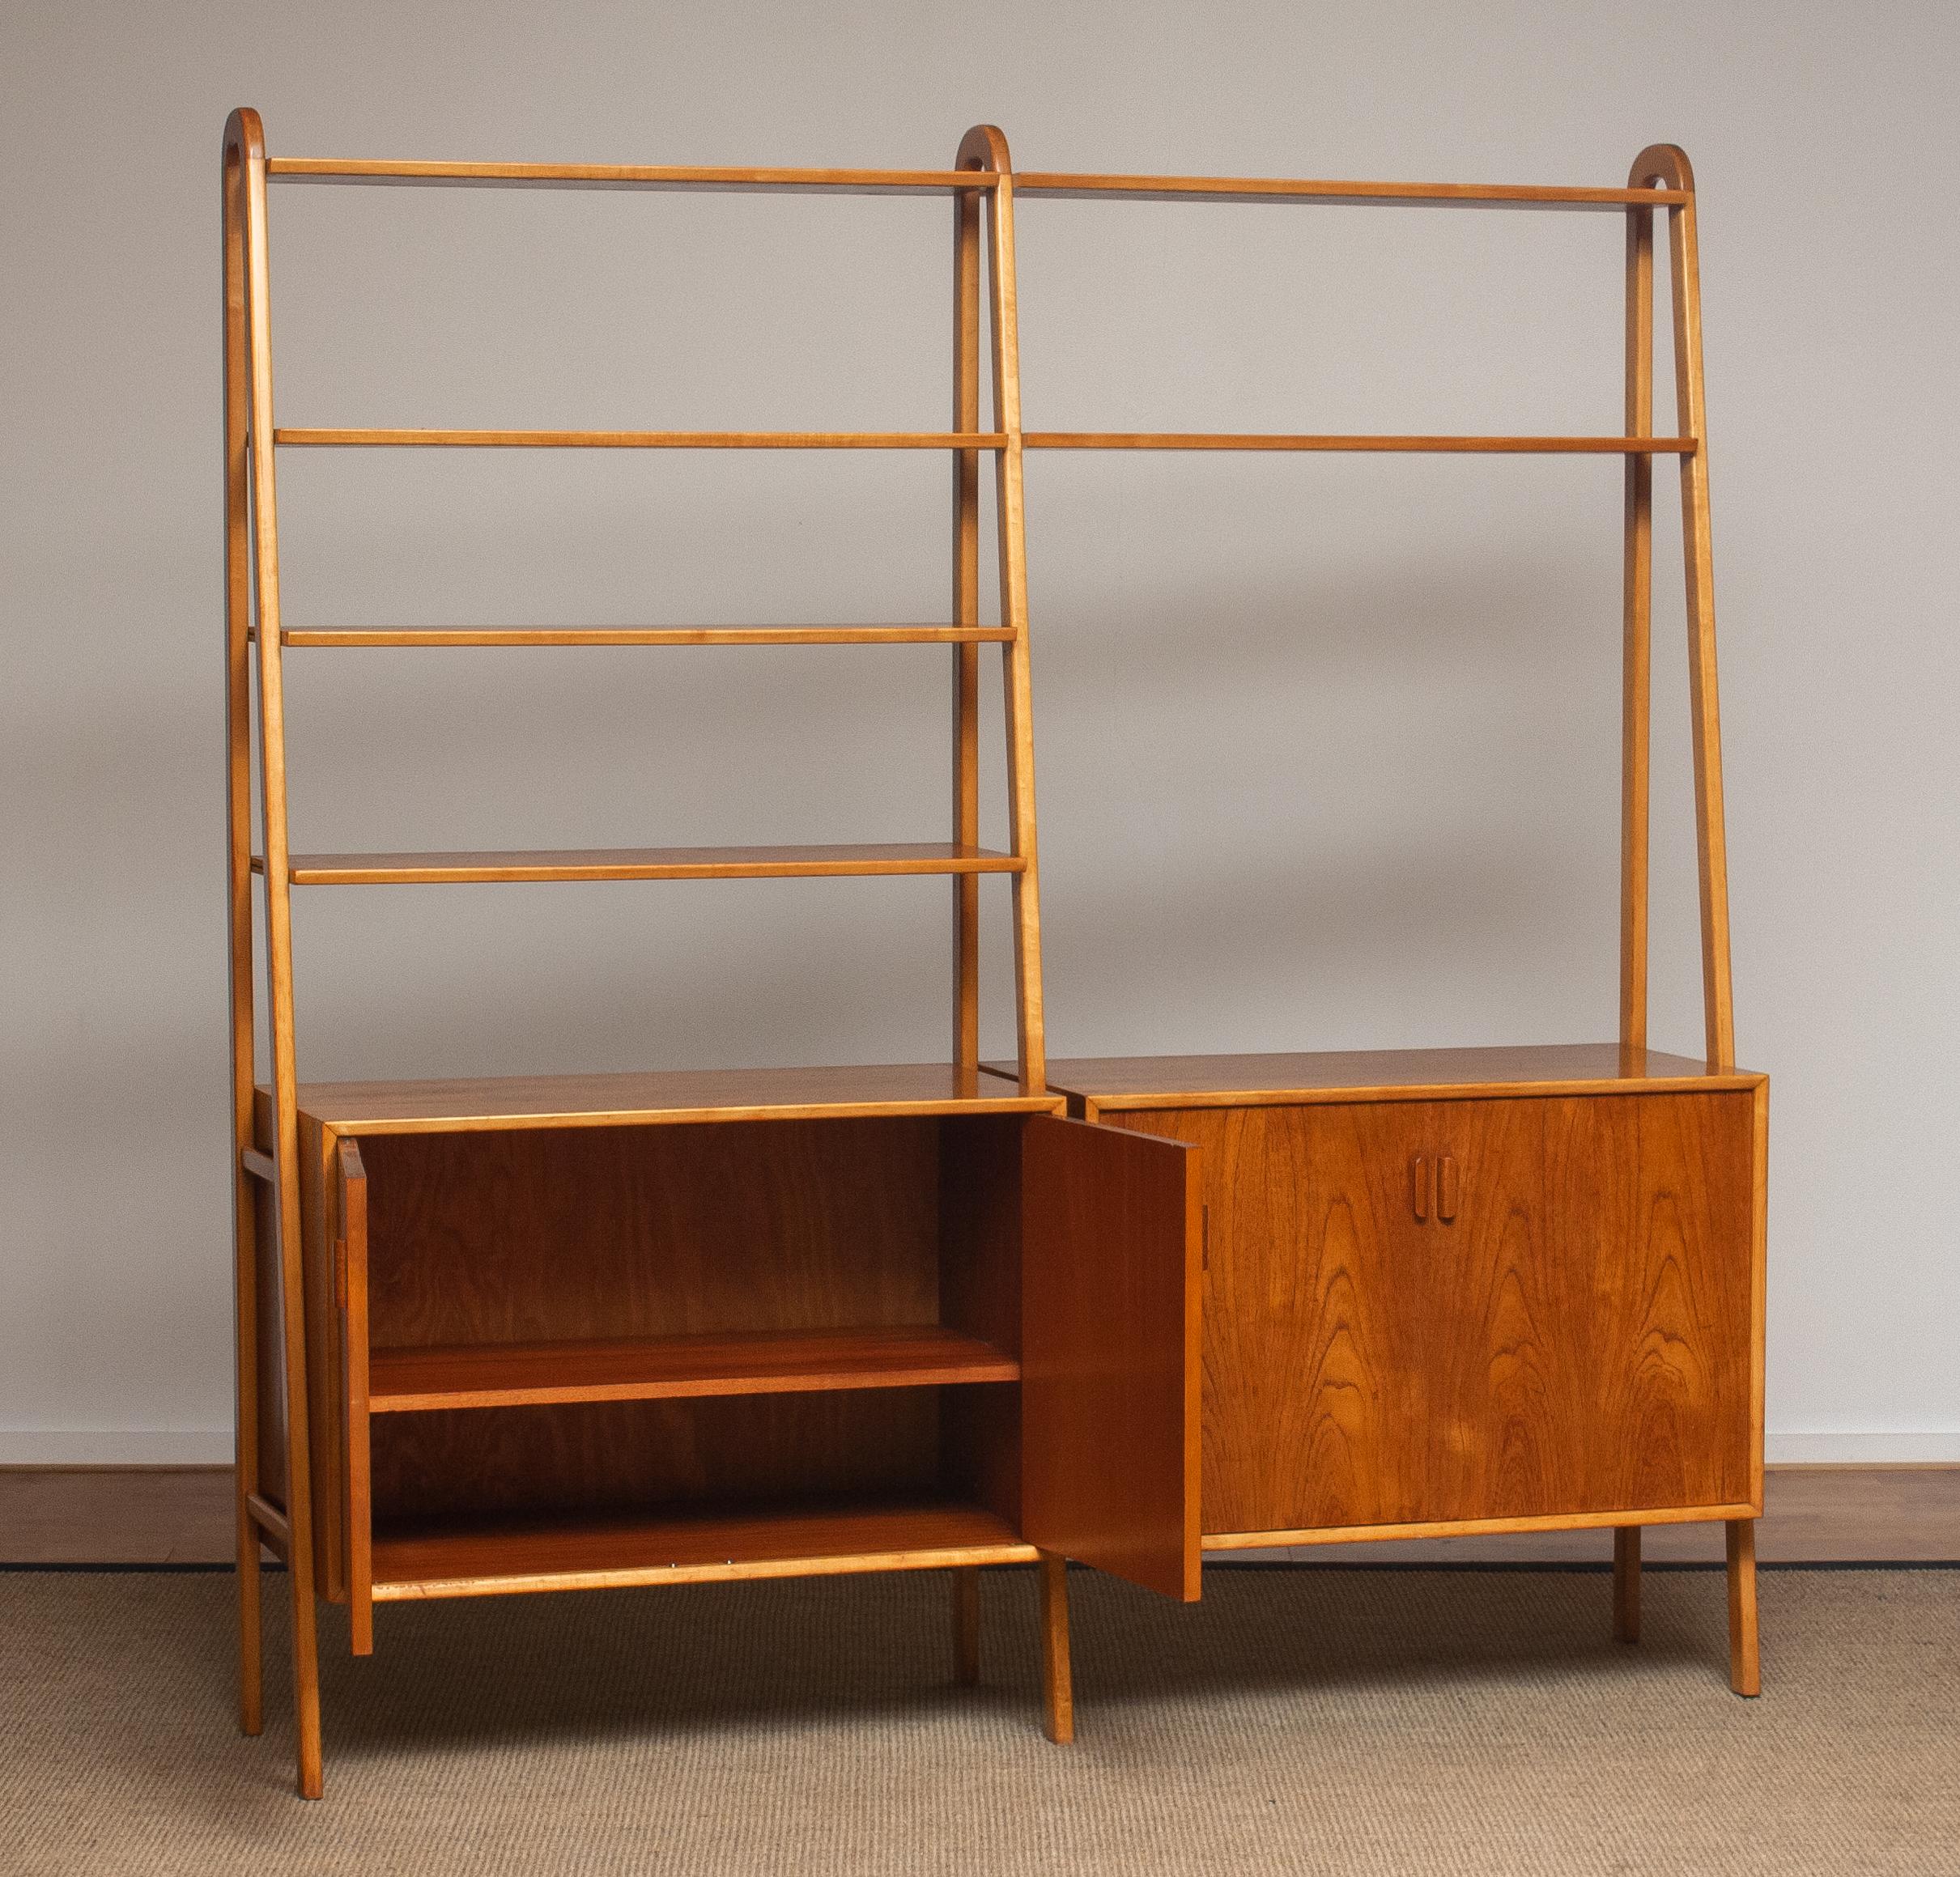 Beautiful and typical Swedish bookcase or shelfs cabinet in teak in combination with beech stands made by Brantorps, Sweden.
This cabinet consists six shelfs in which four are adjustable. The two on the top are fixed.
Two cabinets and also both